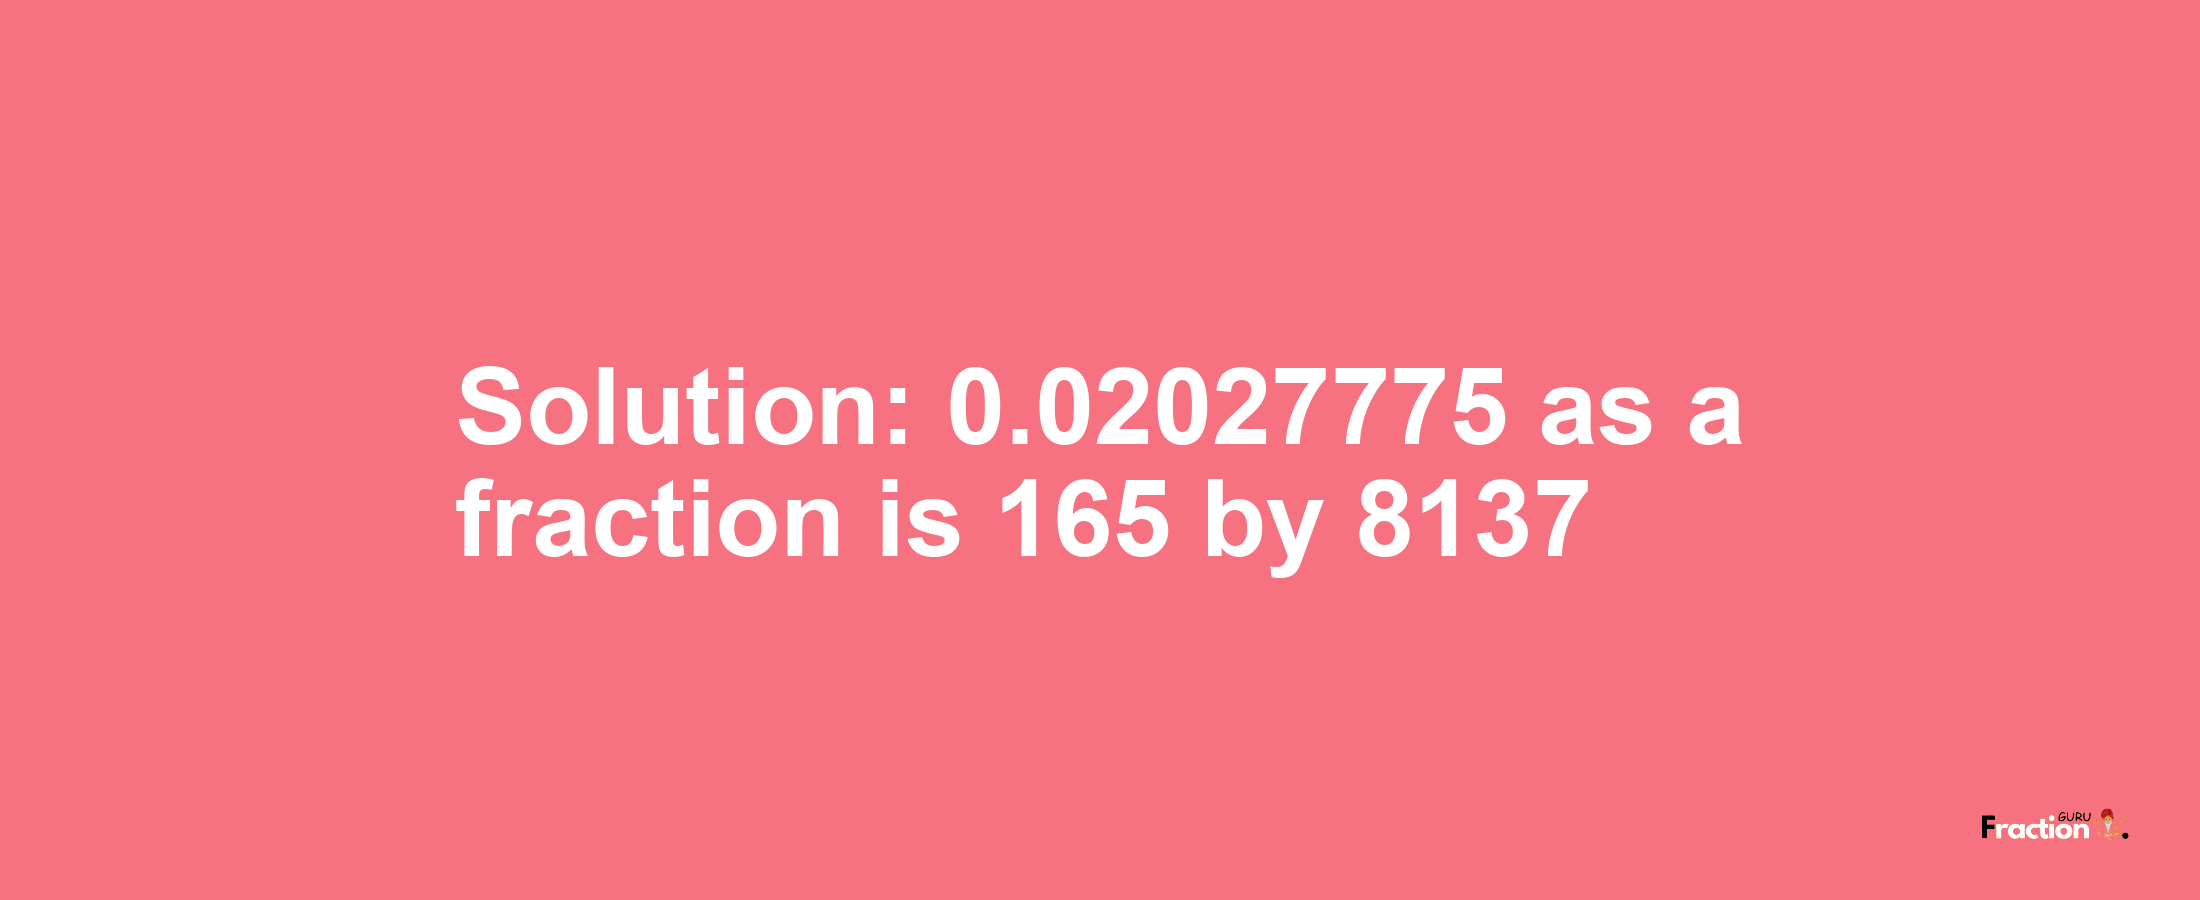 Solution:0.02027775 as a fraction is 165/8137